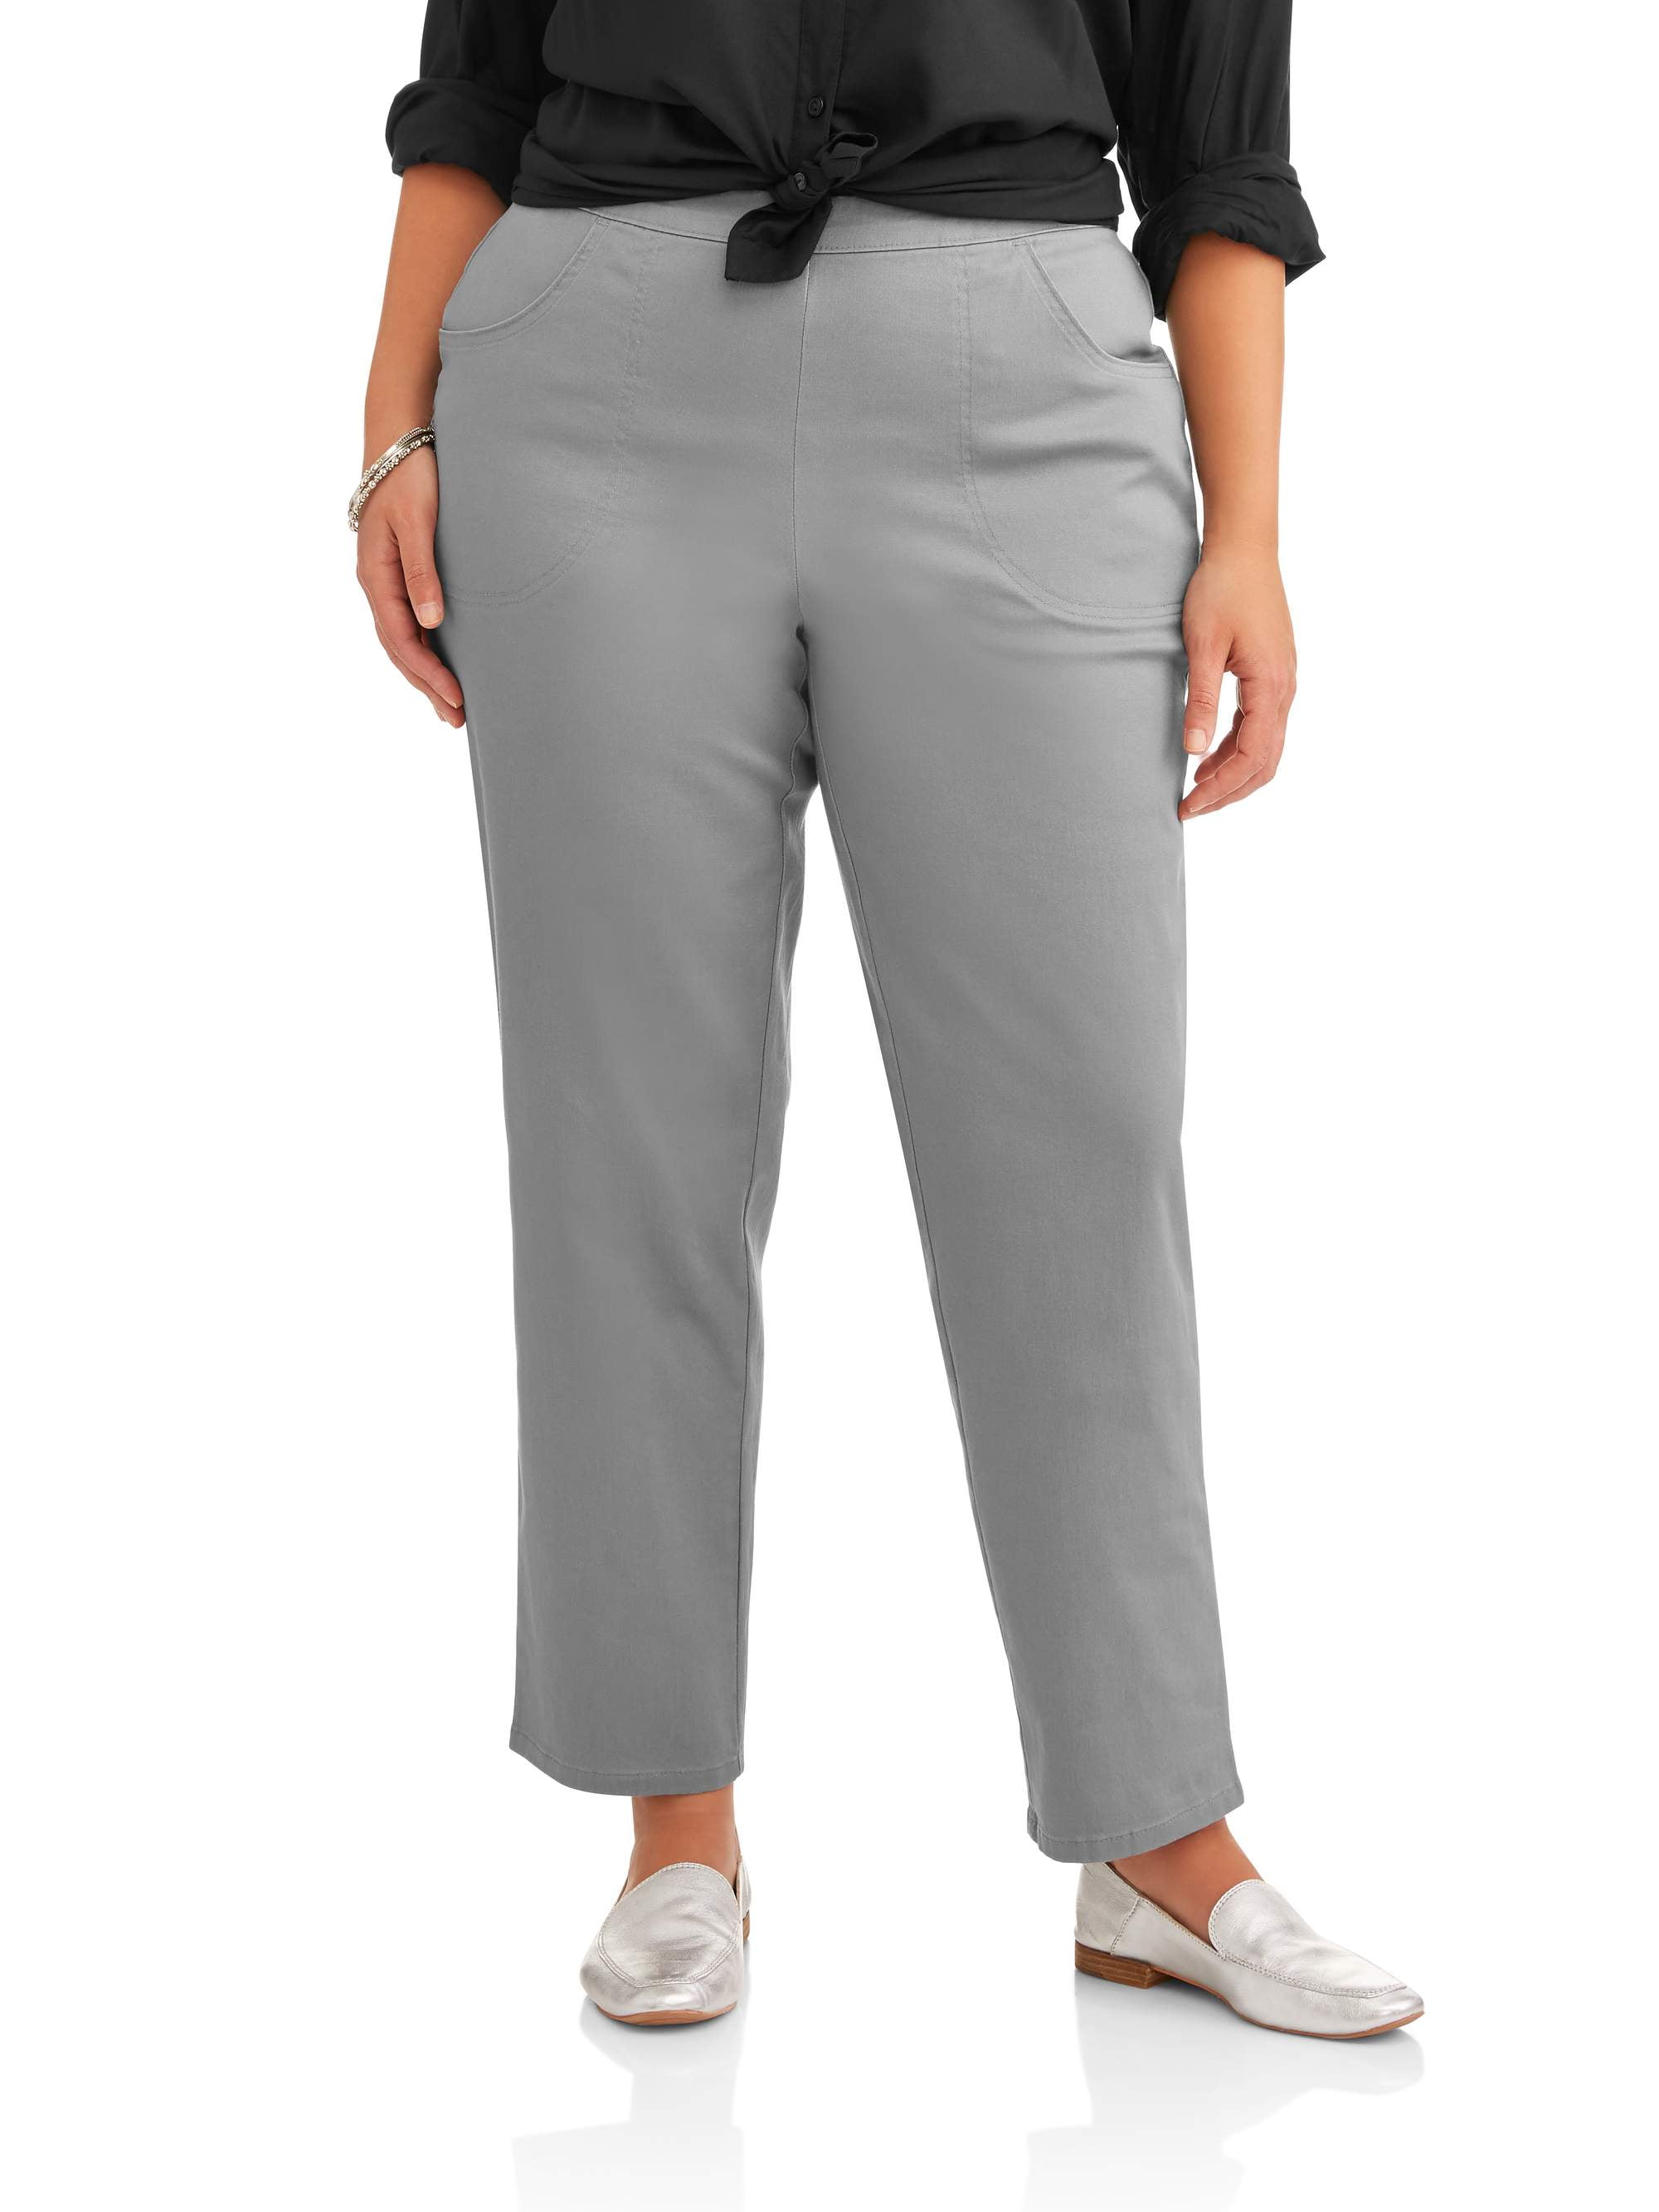 Just My Size Women's Plus Size Pull on Stretch Denim&twill Pants,Also in  Petite